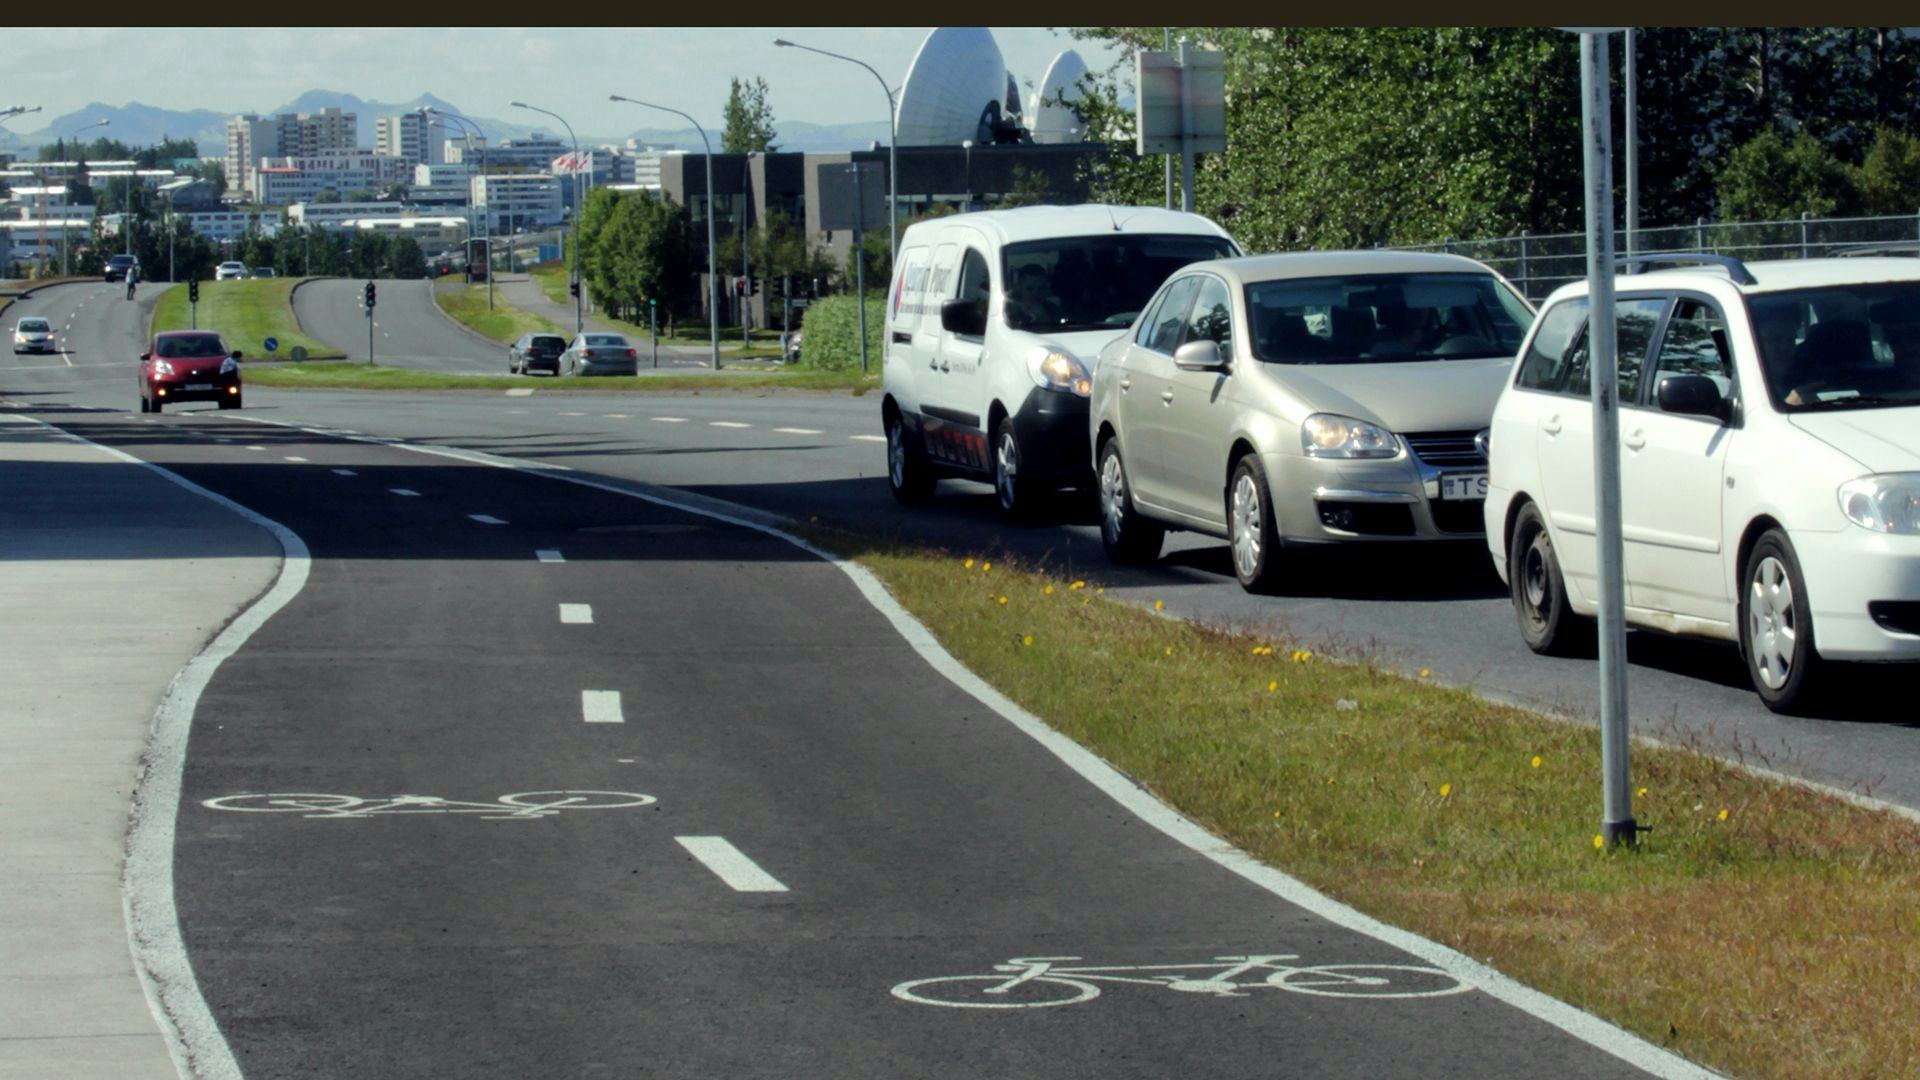 An urban scene with bicycle lane and cars parked alongside